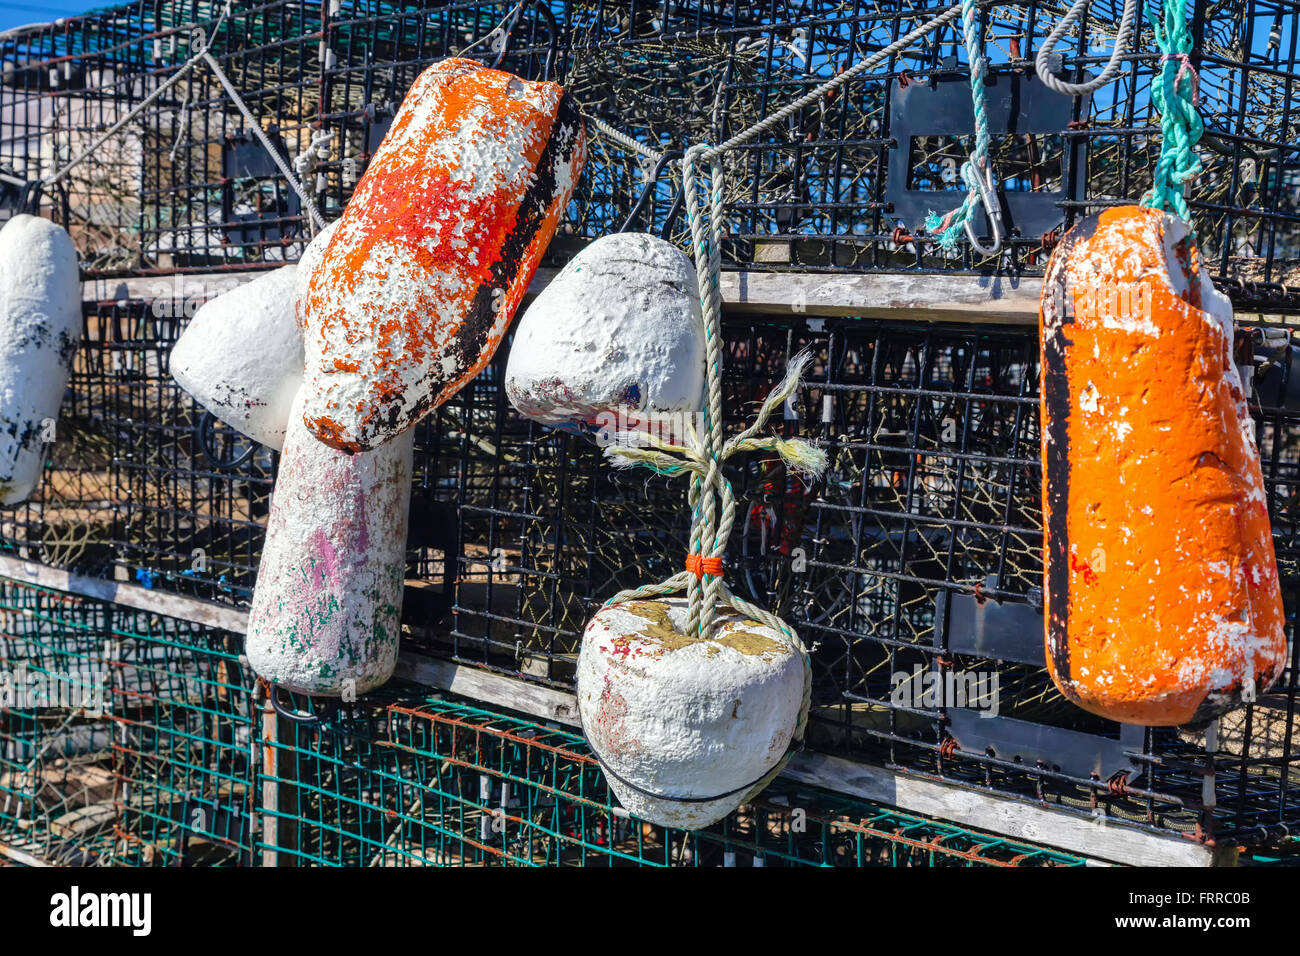 Weathered buoys and traditional lobster traps on the wharf. Stock Photo